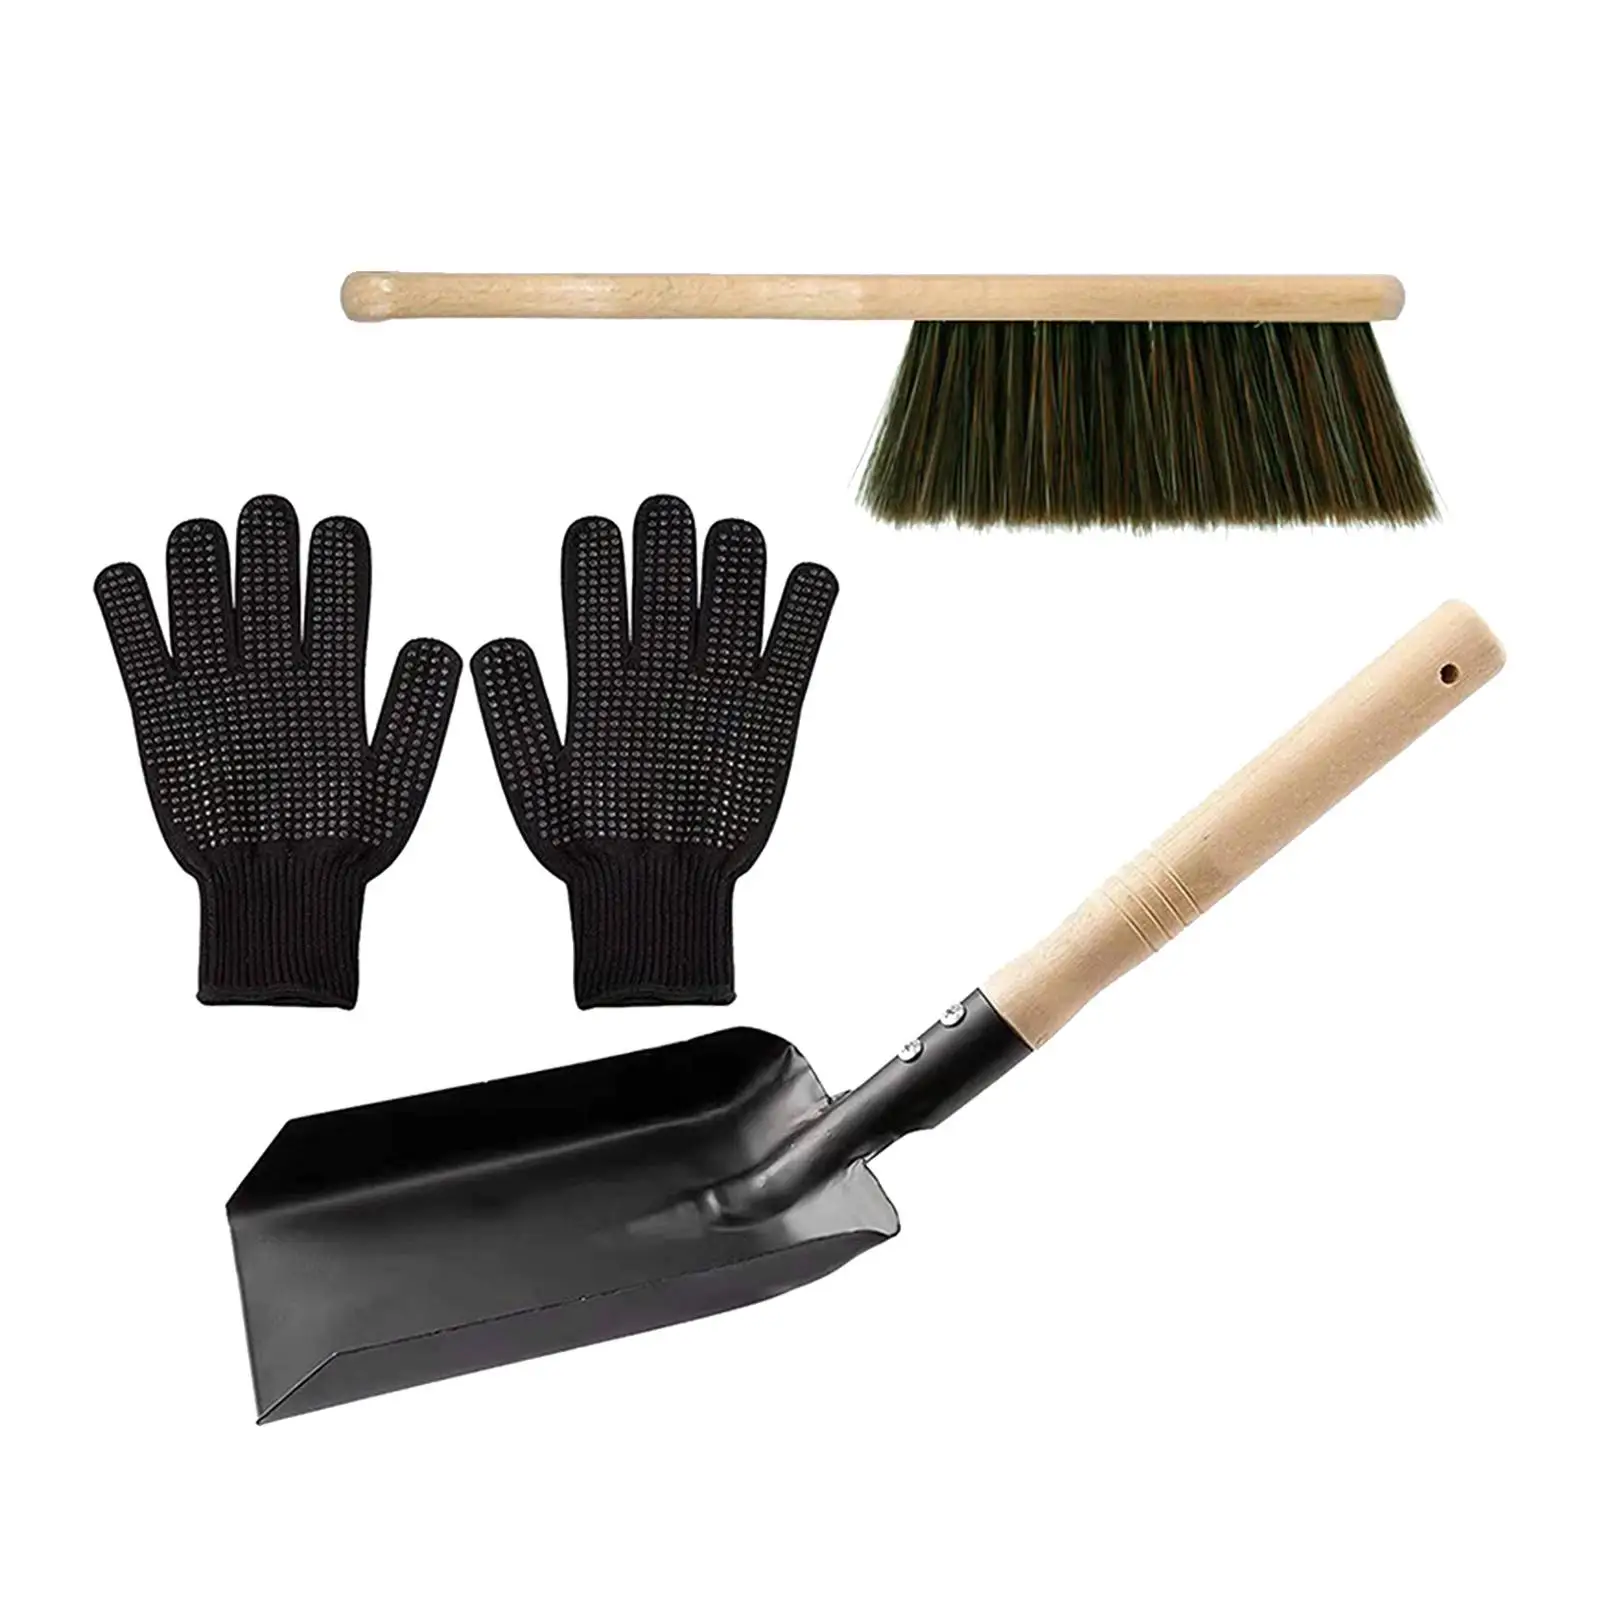 Fireplace Tools Set Ash Silicone Gloves Firepit Tools Dust Shovel Hearth Tidy Wood Burner Accessories for Dust Cleaning Indoor